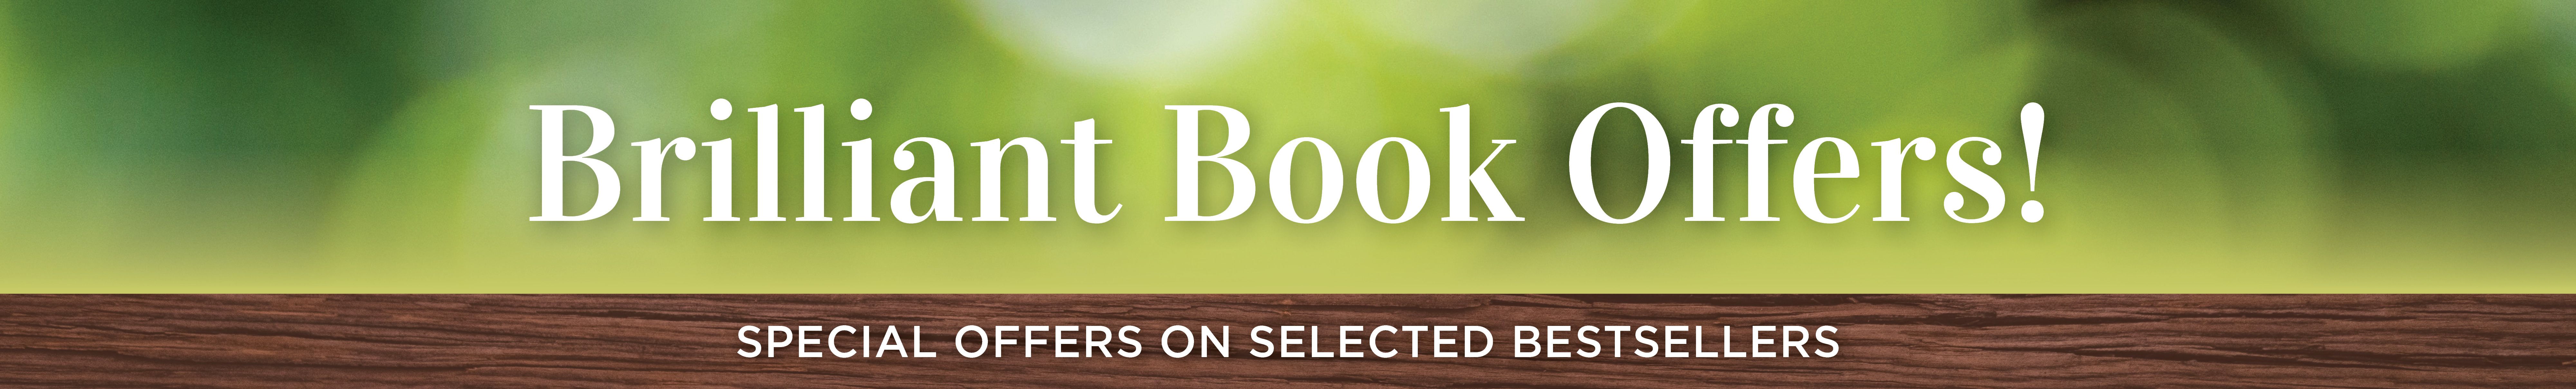 Brilliant Book Offers! Special offers on selected bestsellers.